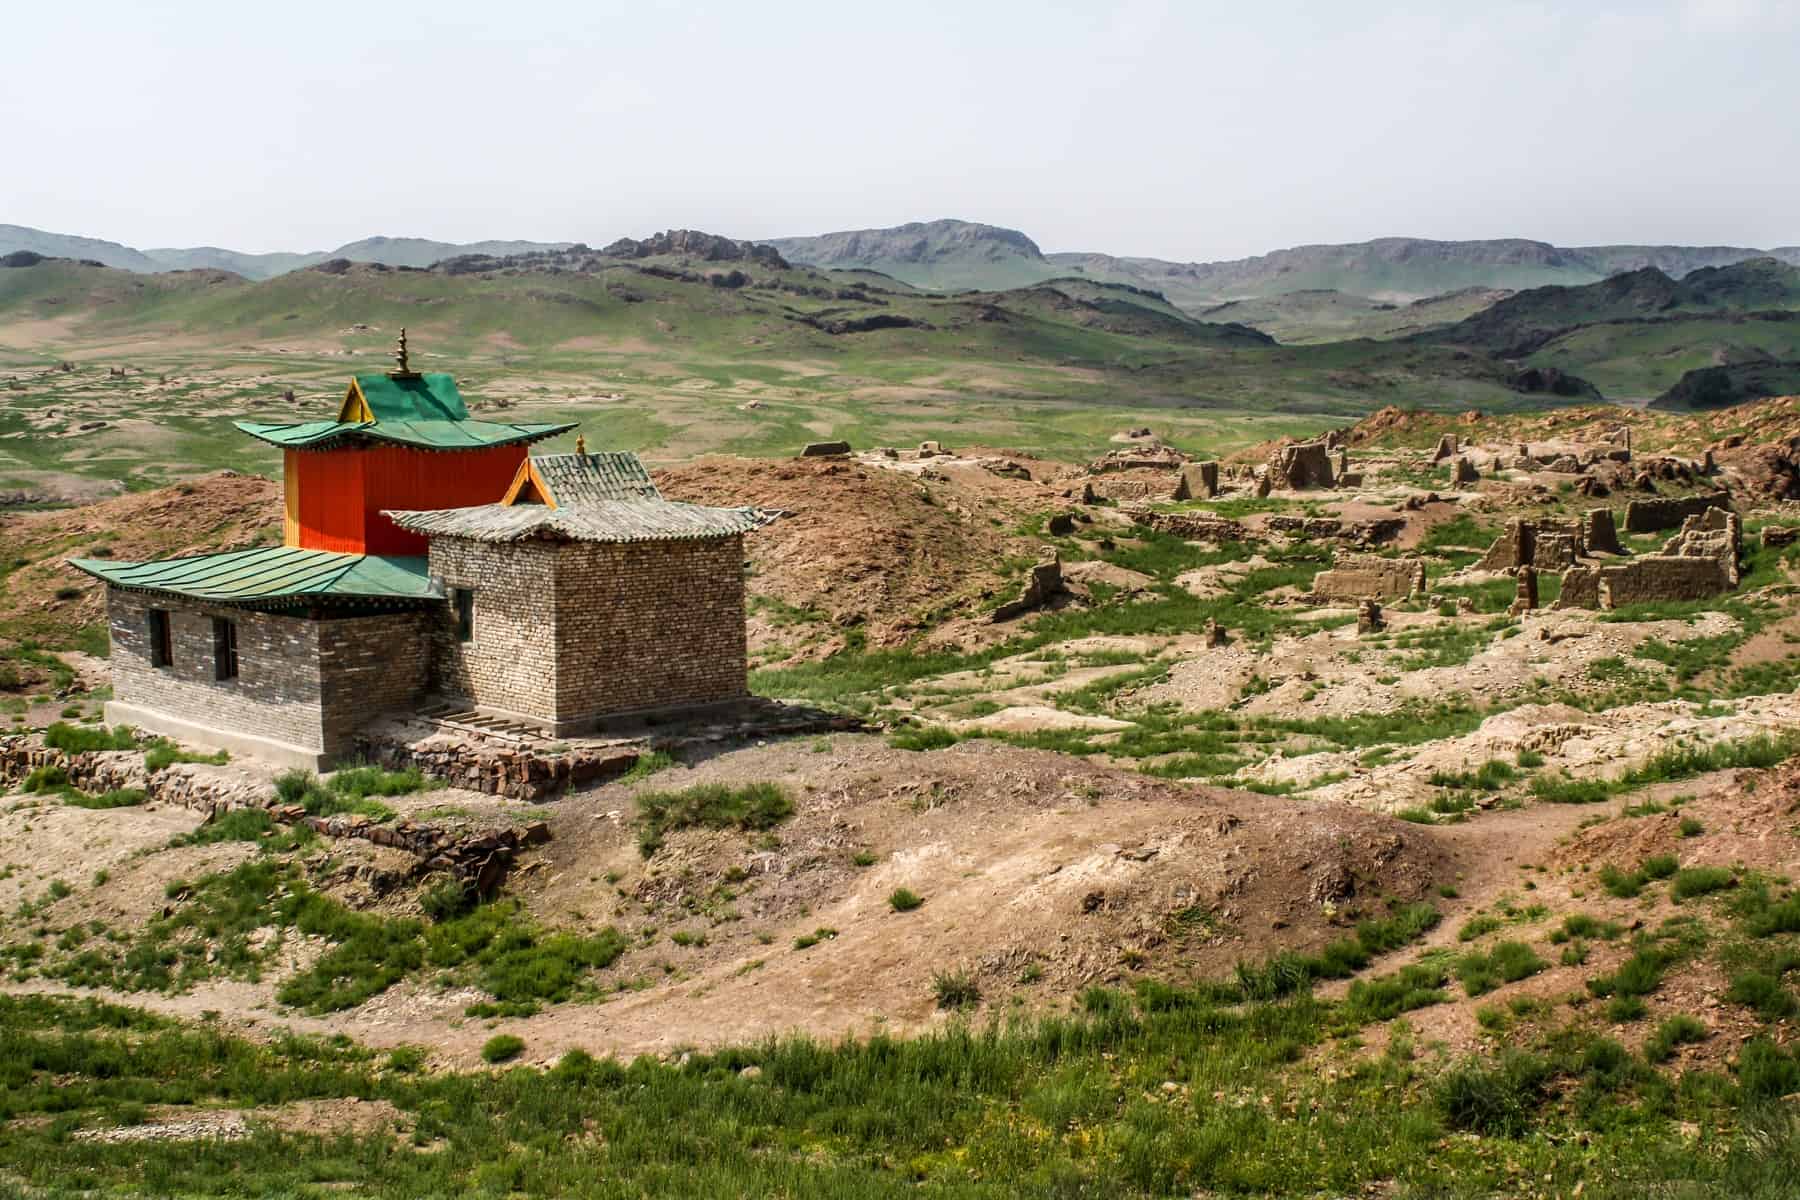 The red building with a green roof that marks the site of the Ongii Monastery in Mongolia